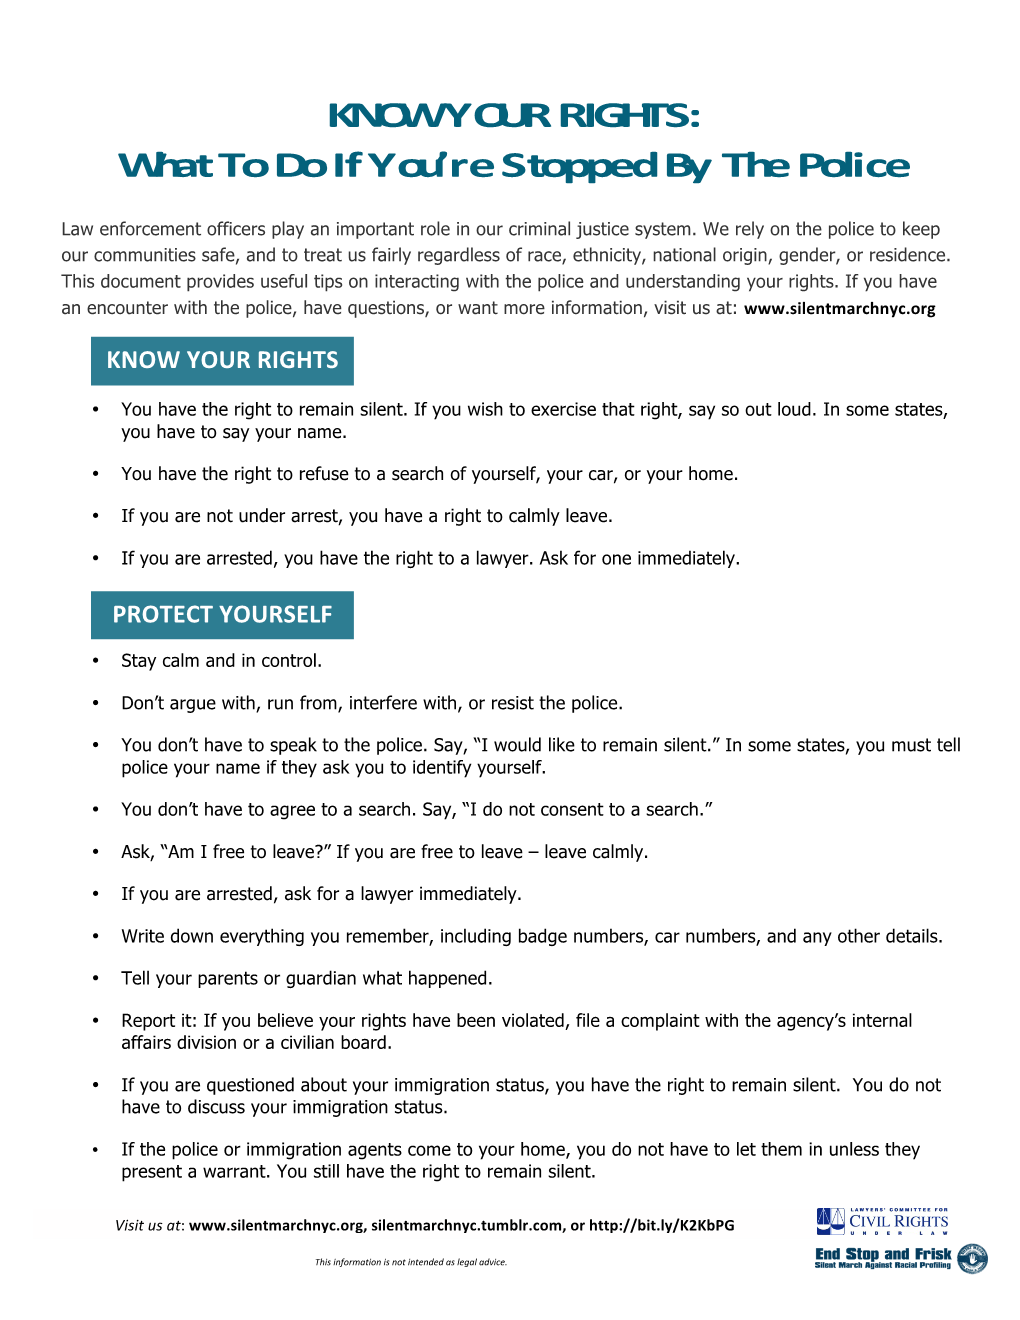 KNOW YOUR RIGHTS: What to Do If You're Stopped by the Police